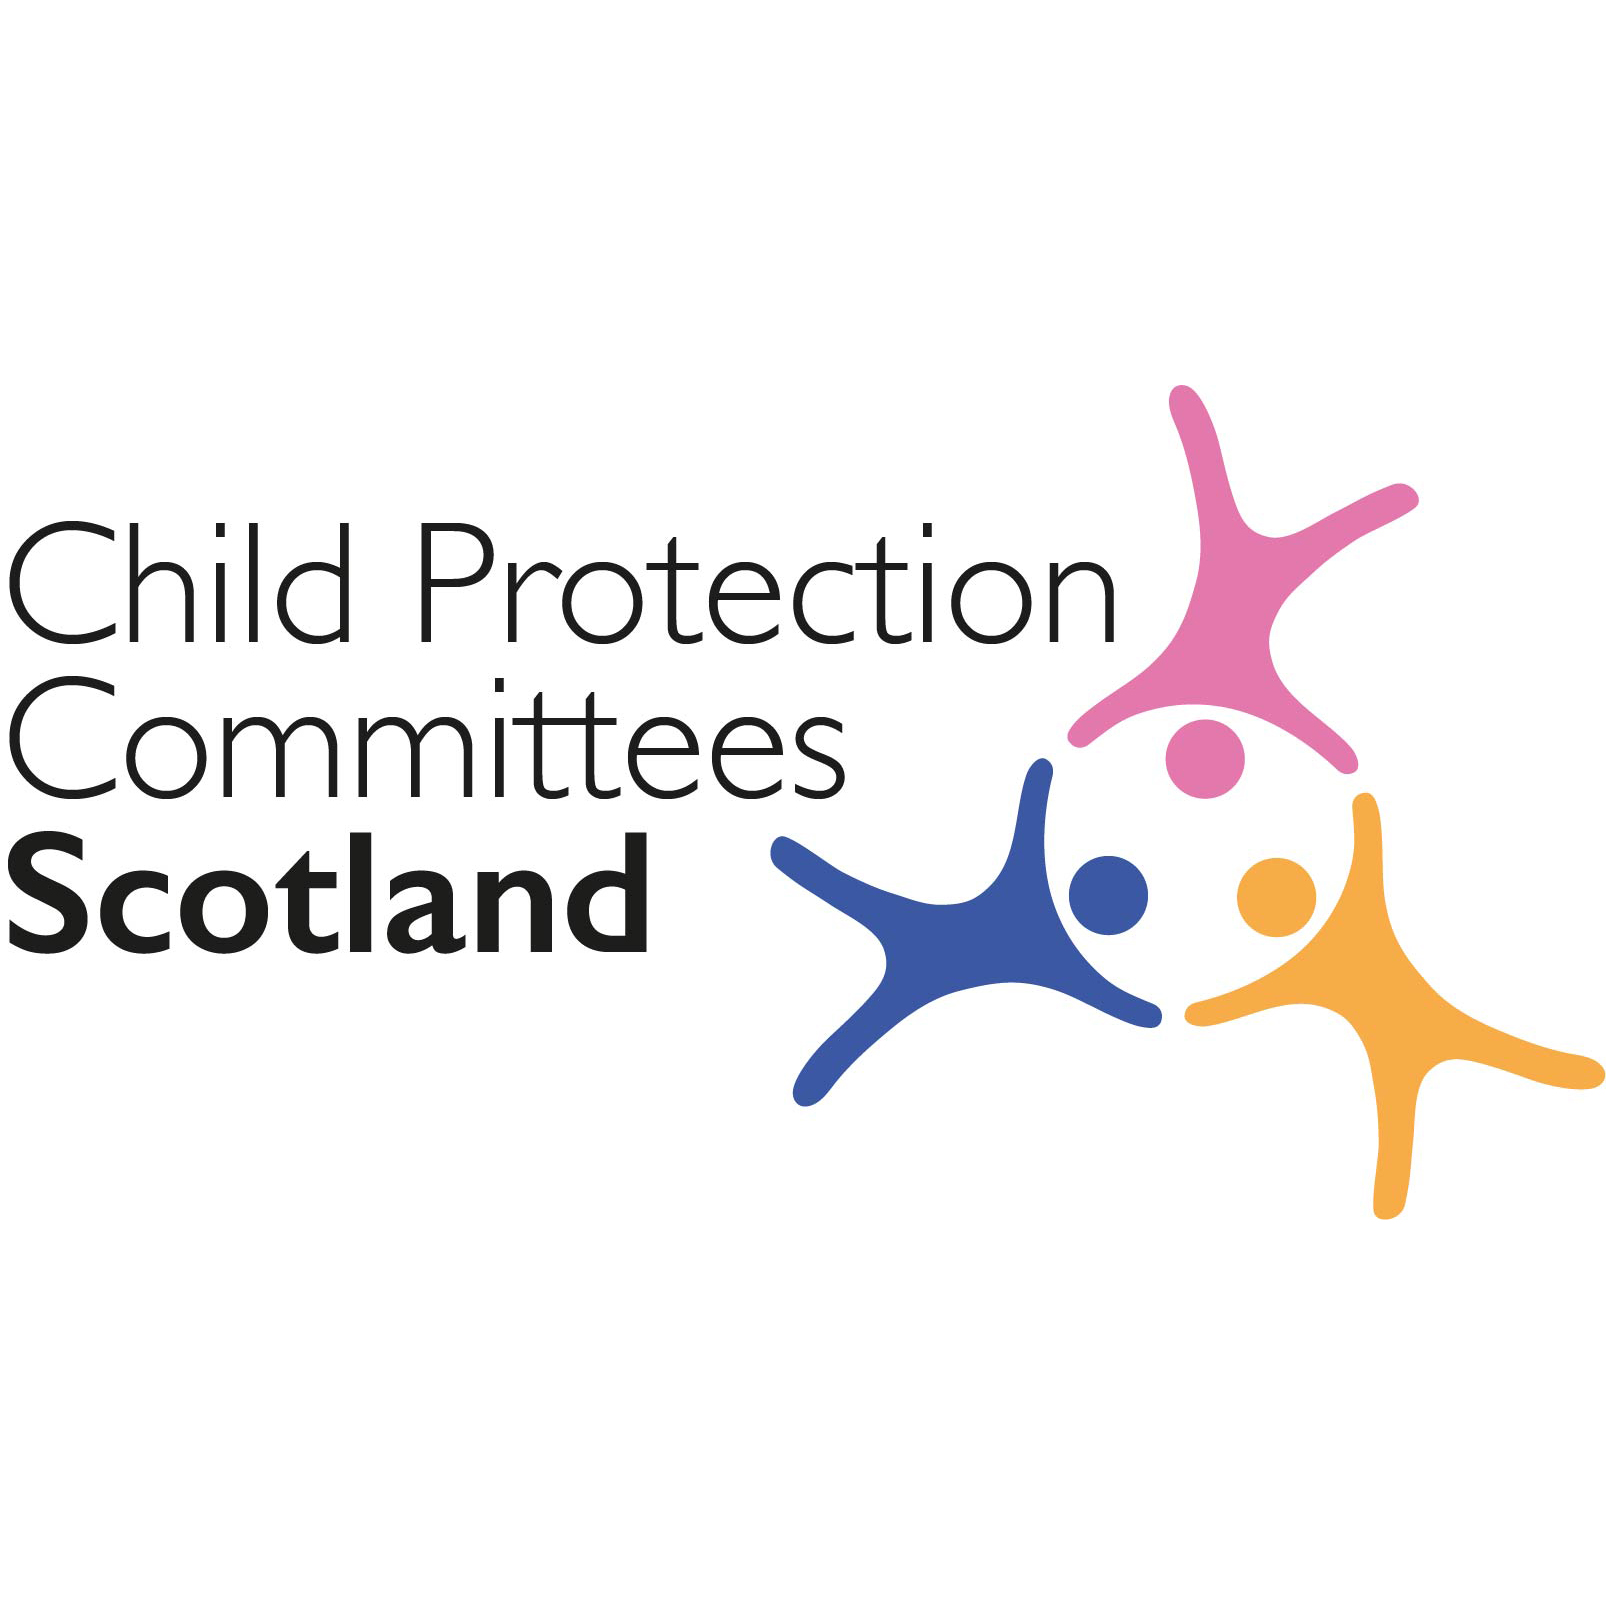 The Child Protection Committees Scotland logo